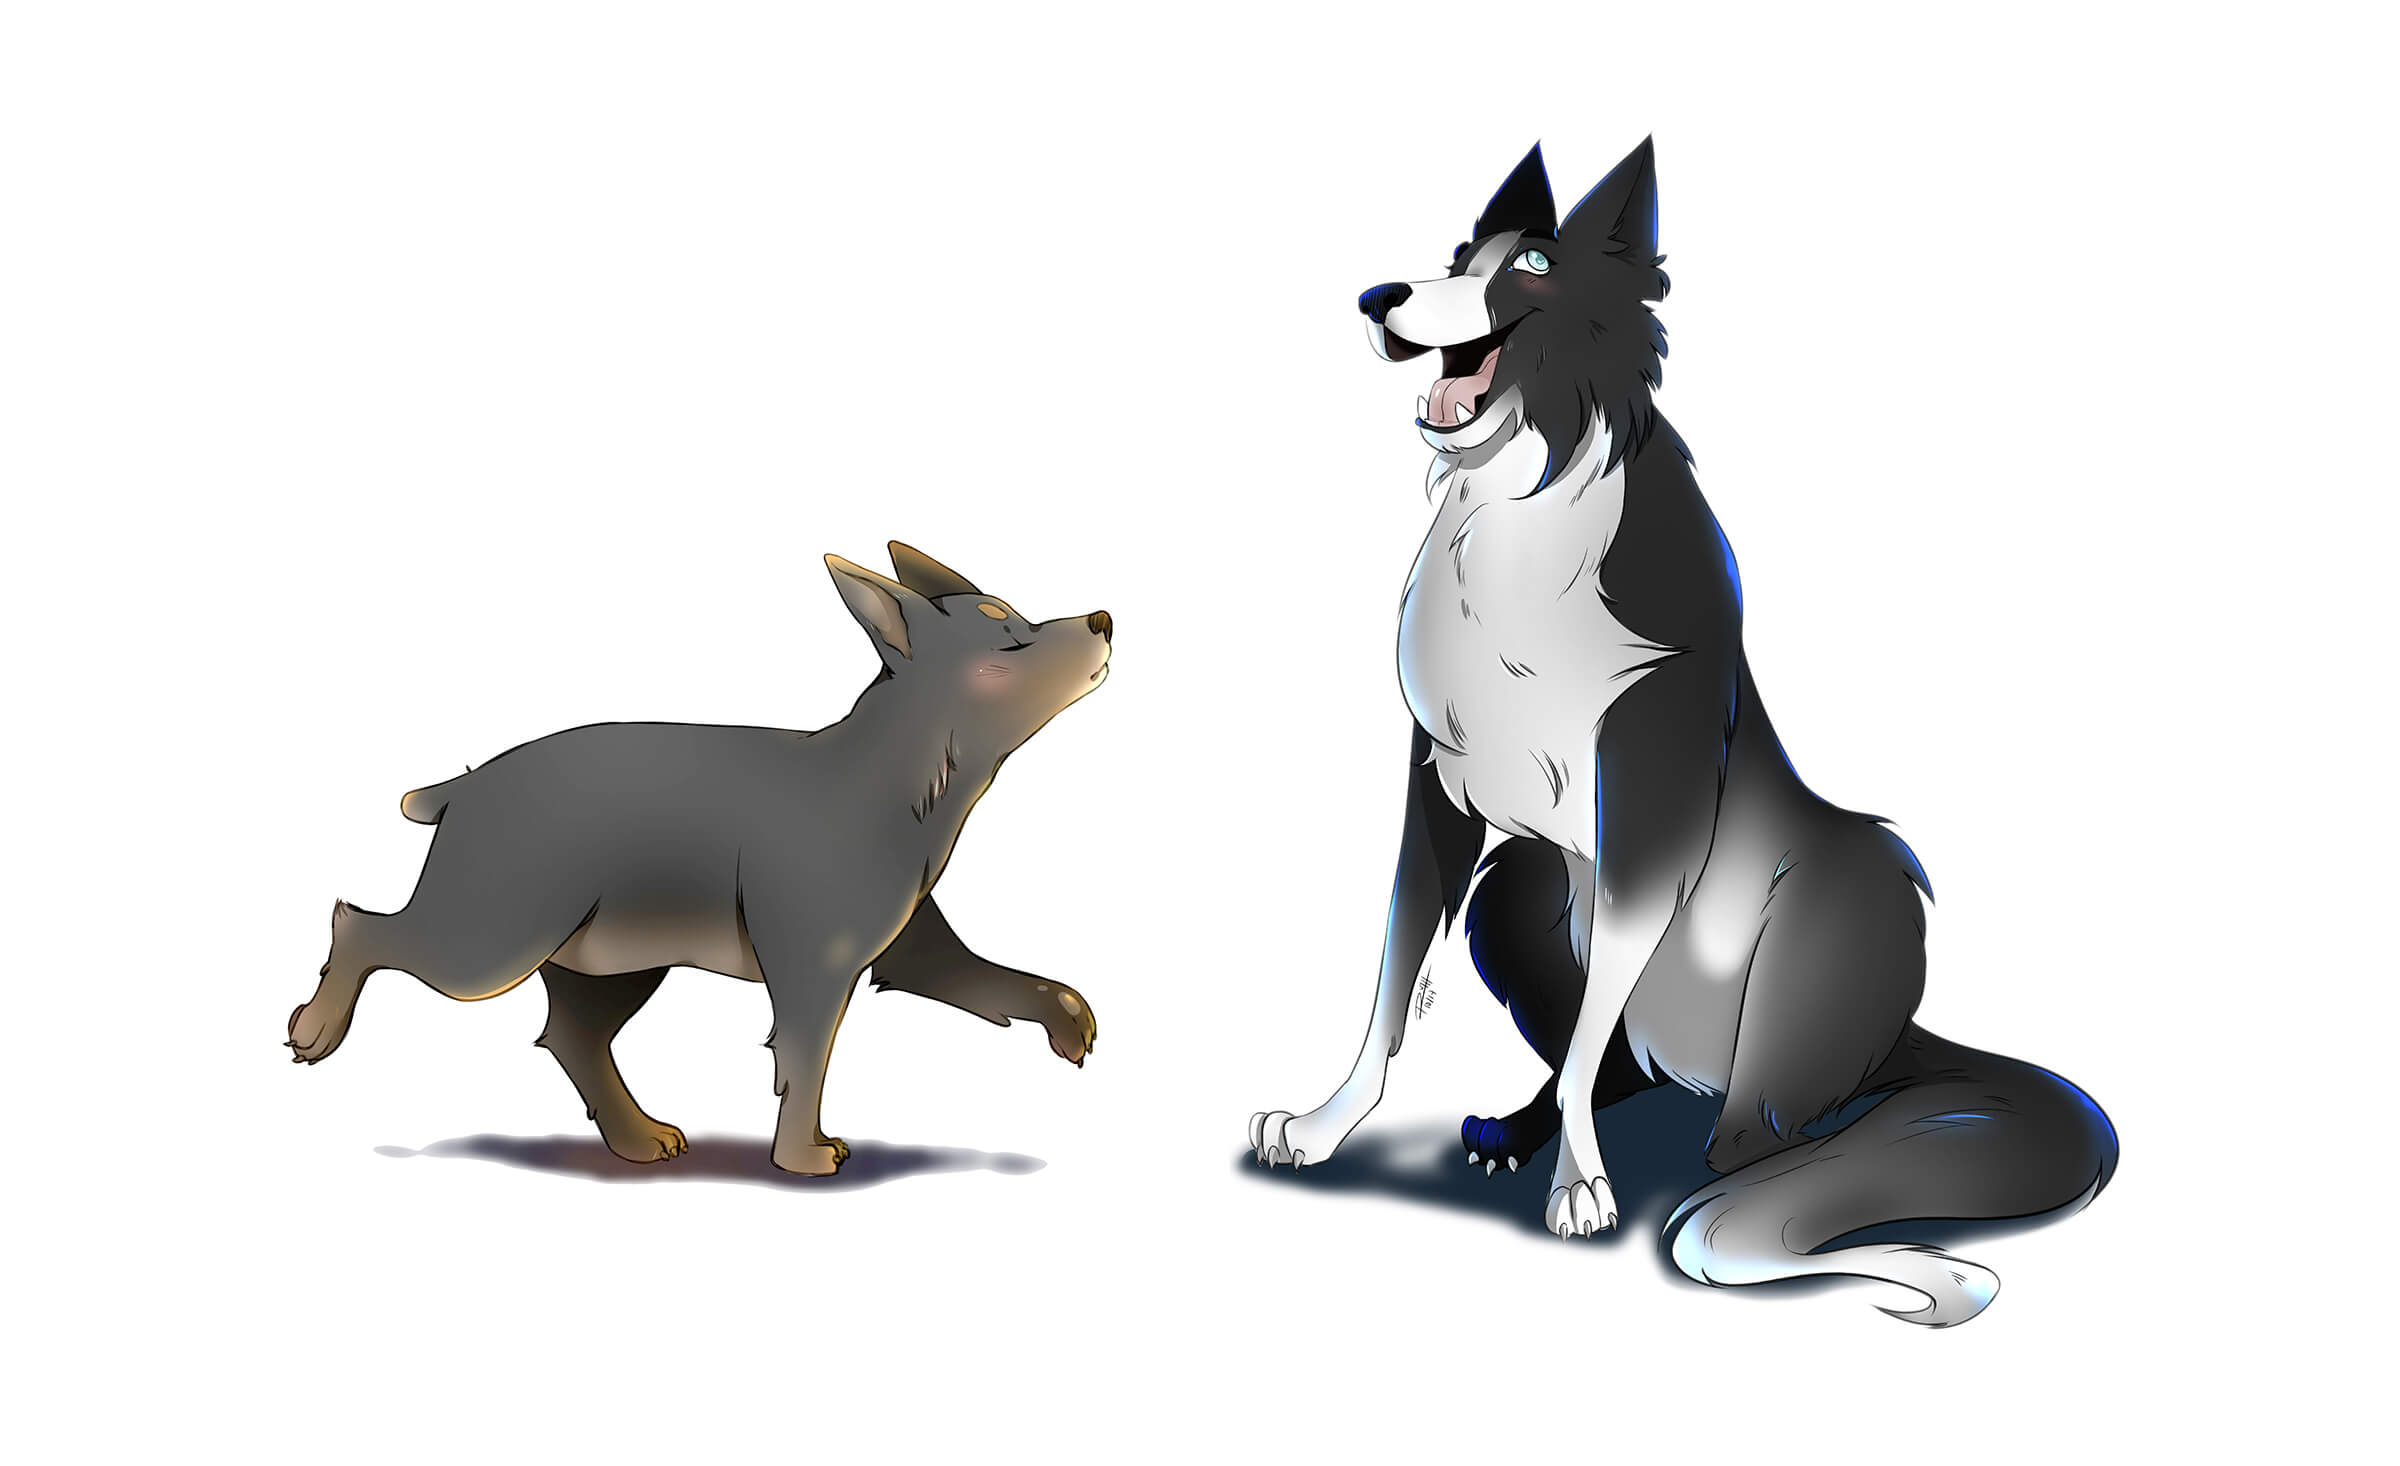 Digital painting of two cartoon dogs, a brown dog trotting aloof, and a black-and-white dog happily sitting.